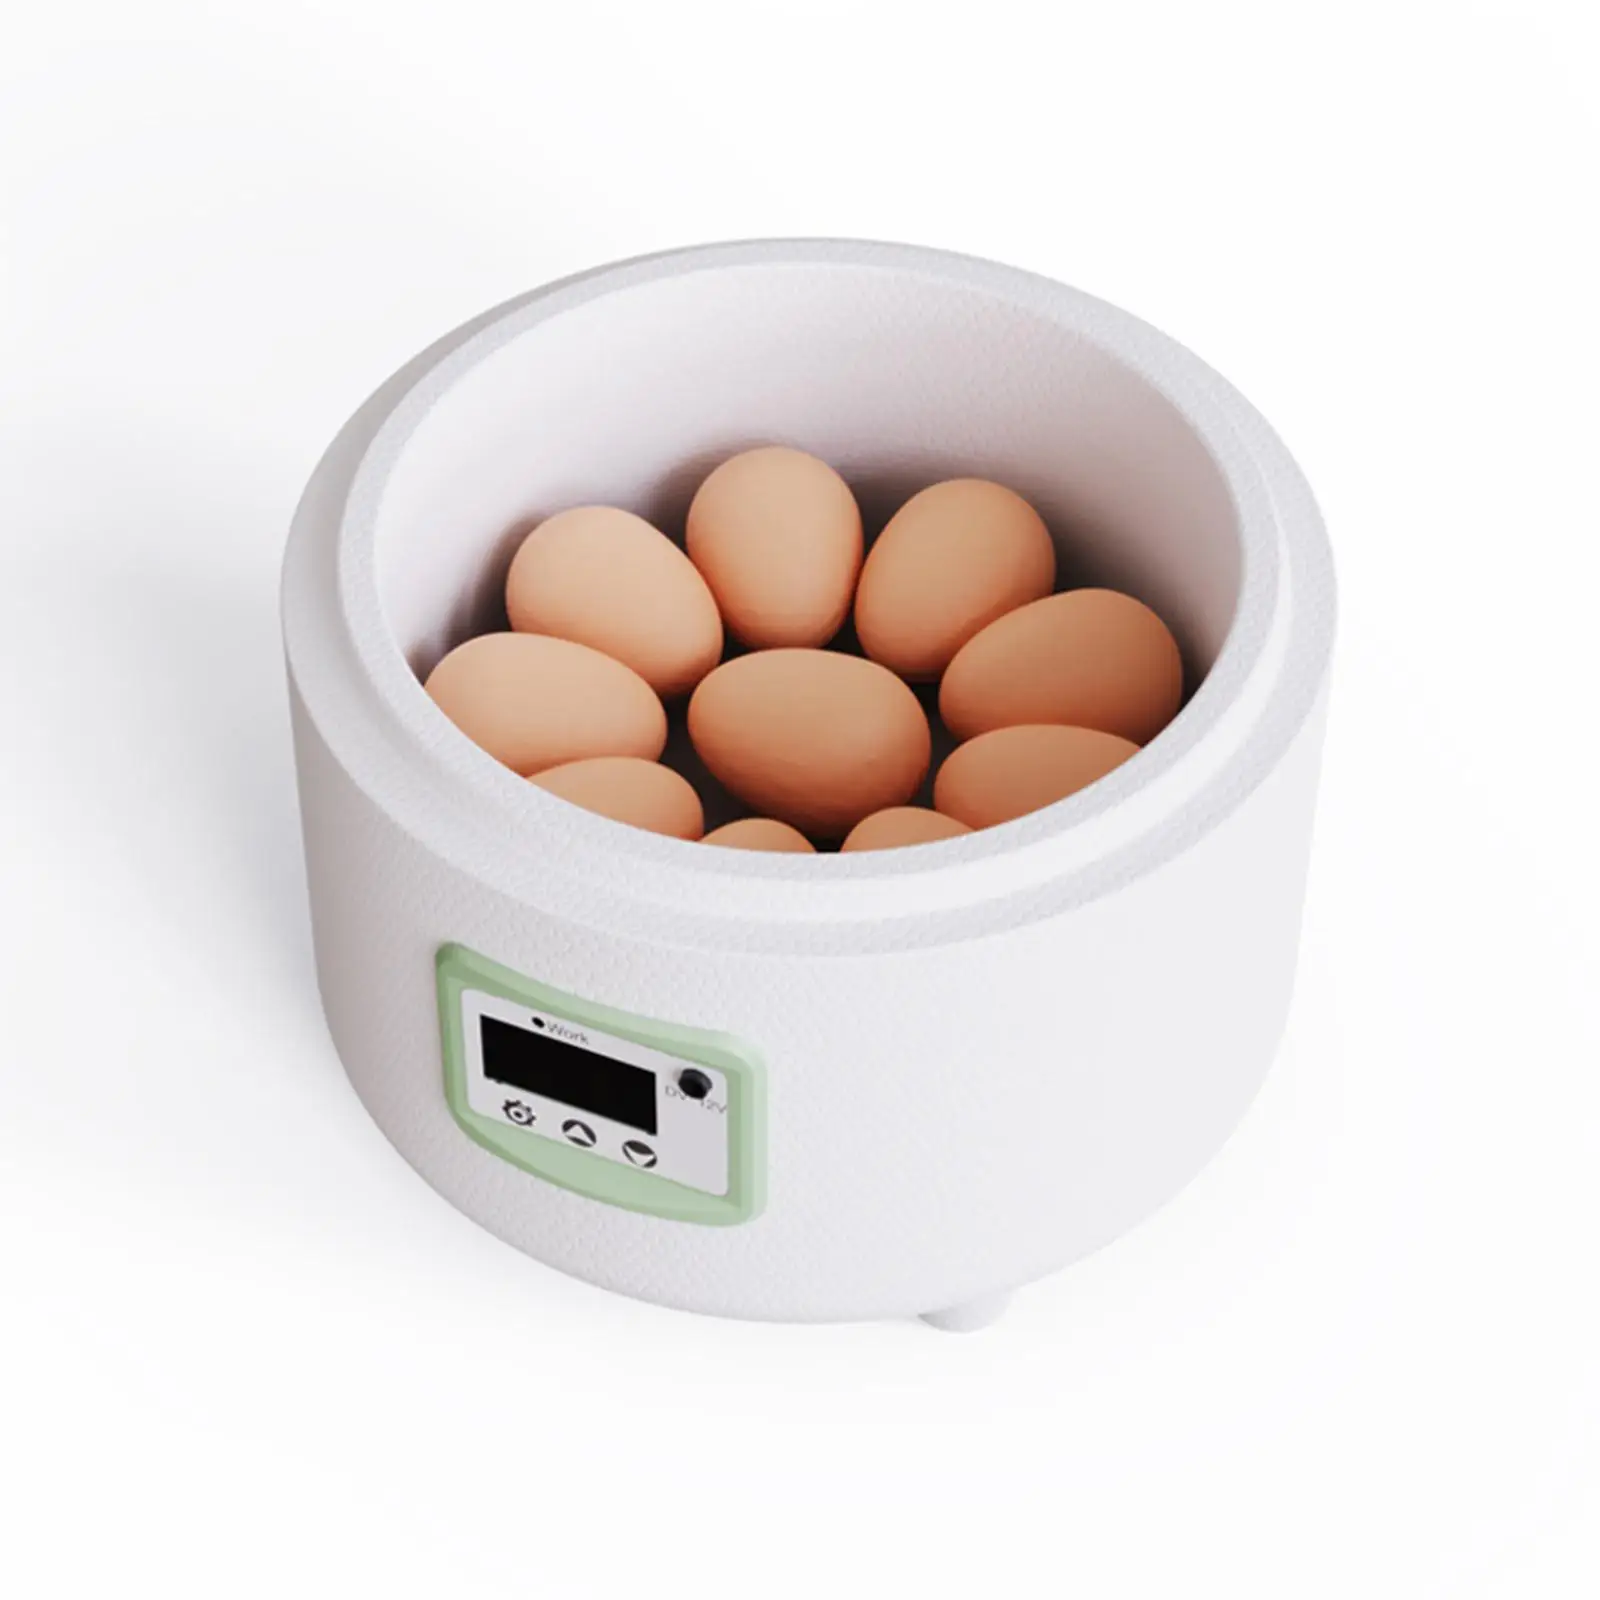 Digital Automatic Egg Incubator Dual Power Poultry Hatcher for Hatching Eggs